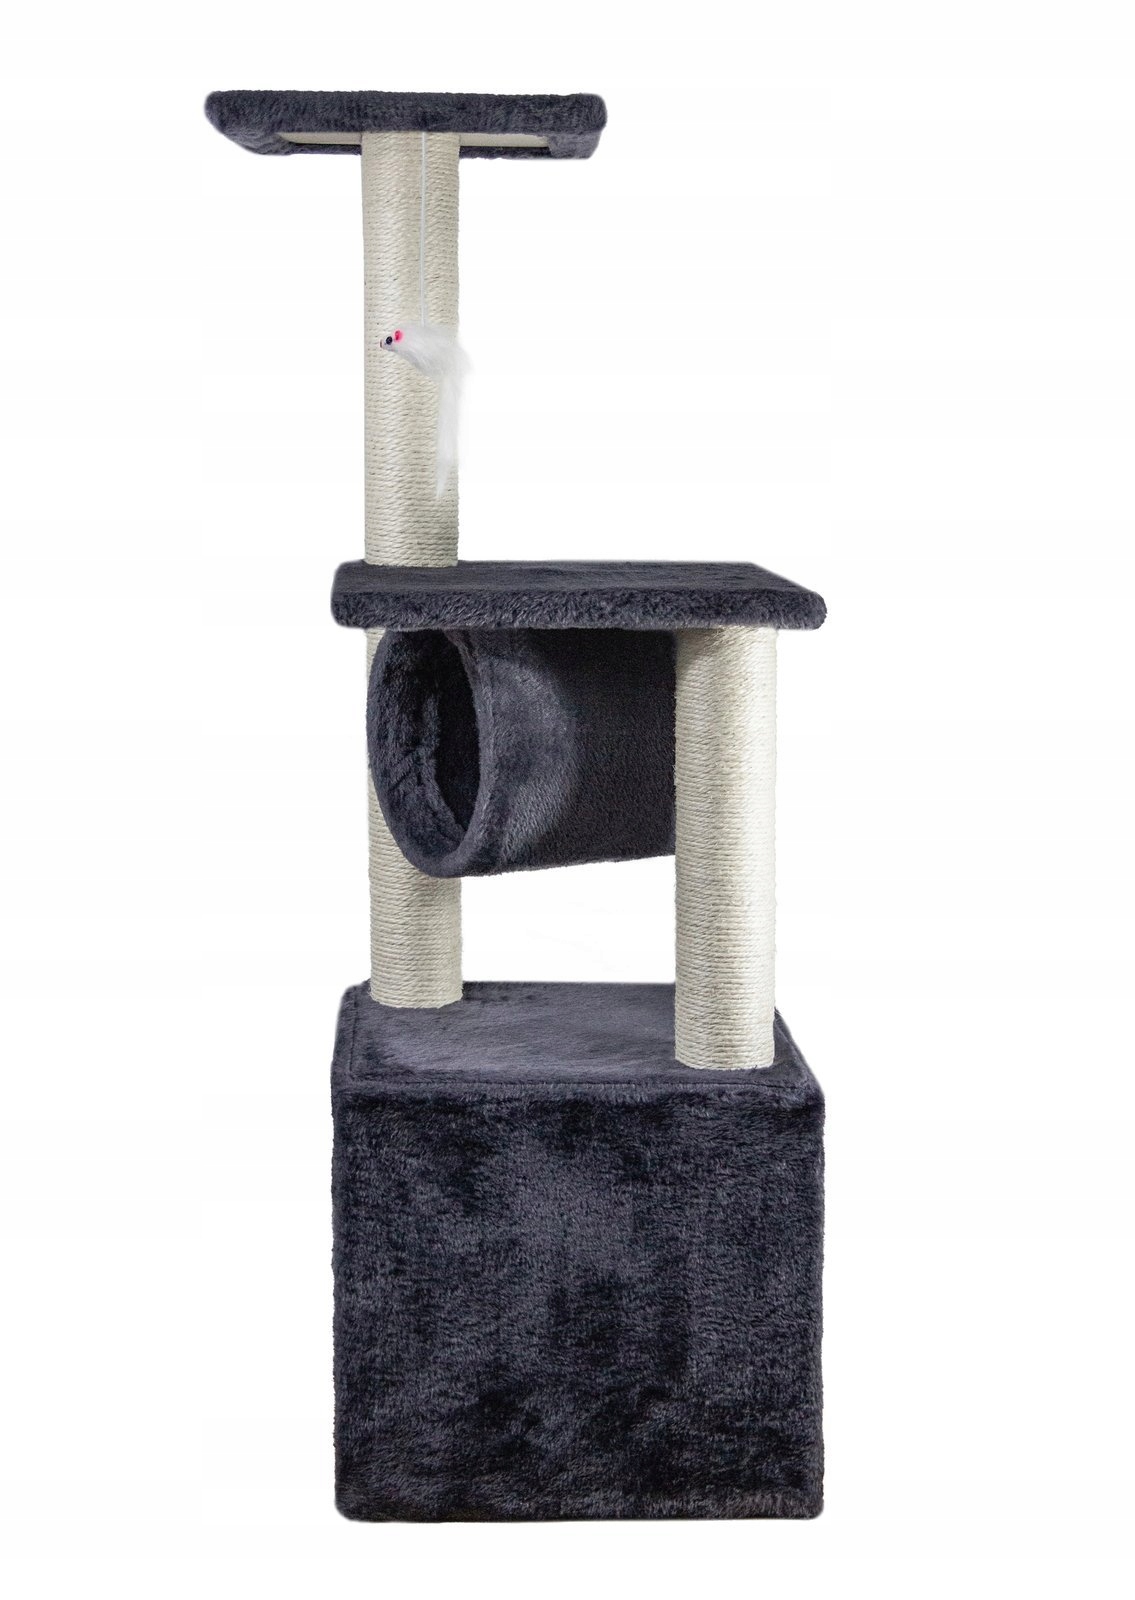 CAT SCRATCH TREE POST HOUSE TUNNEL TOY Brand Pet HOBBY